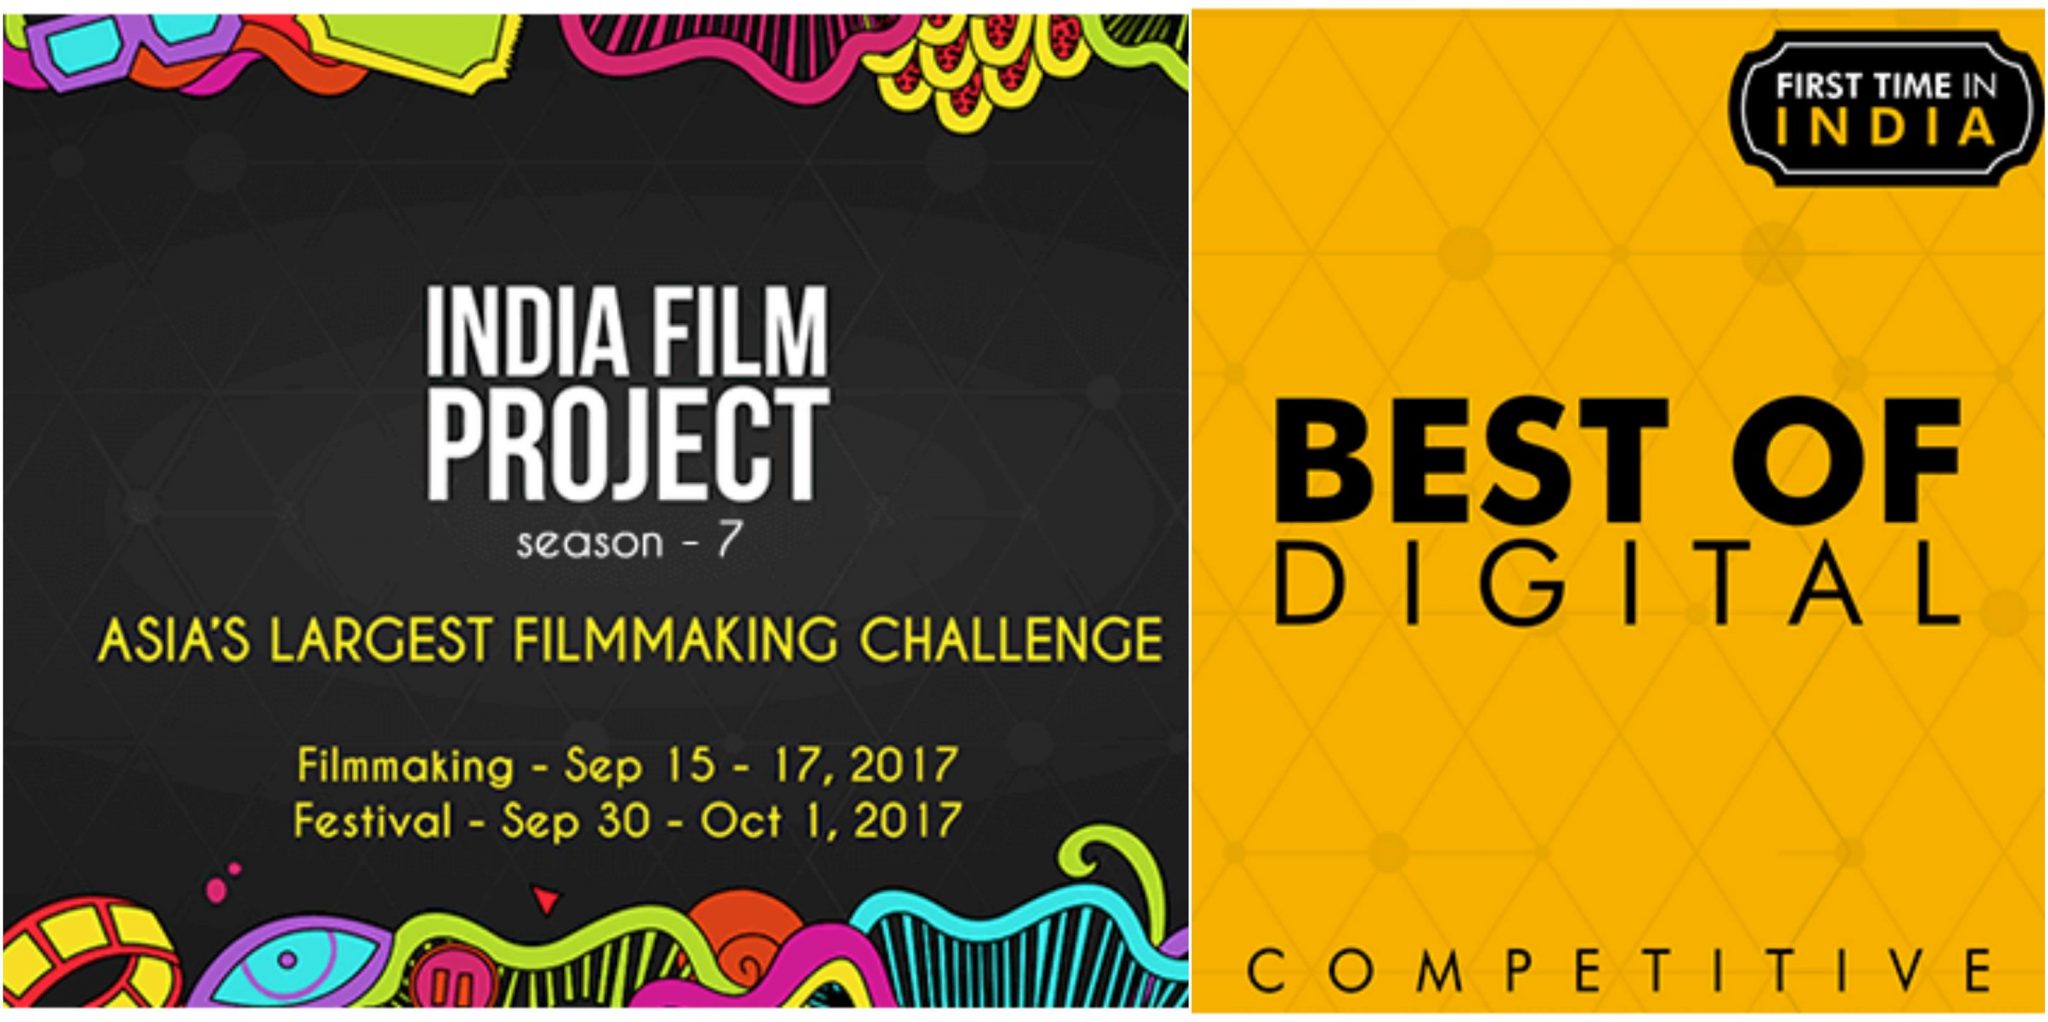 Are You A Digital Content Creator? You Can Now Compete At This Festival & Win Big!